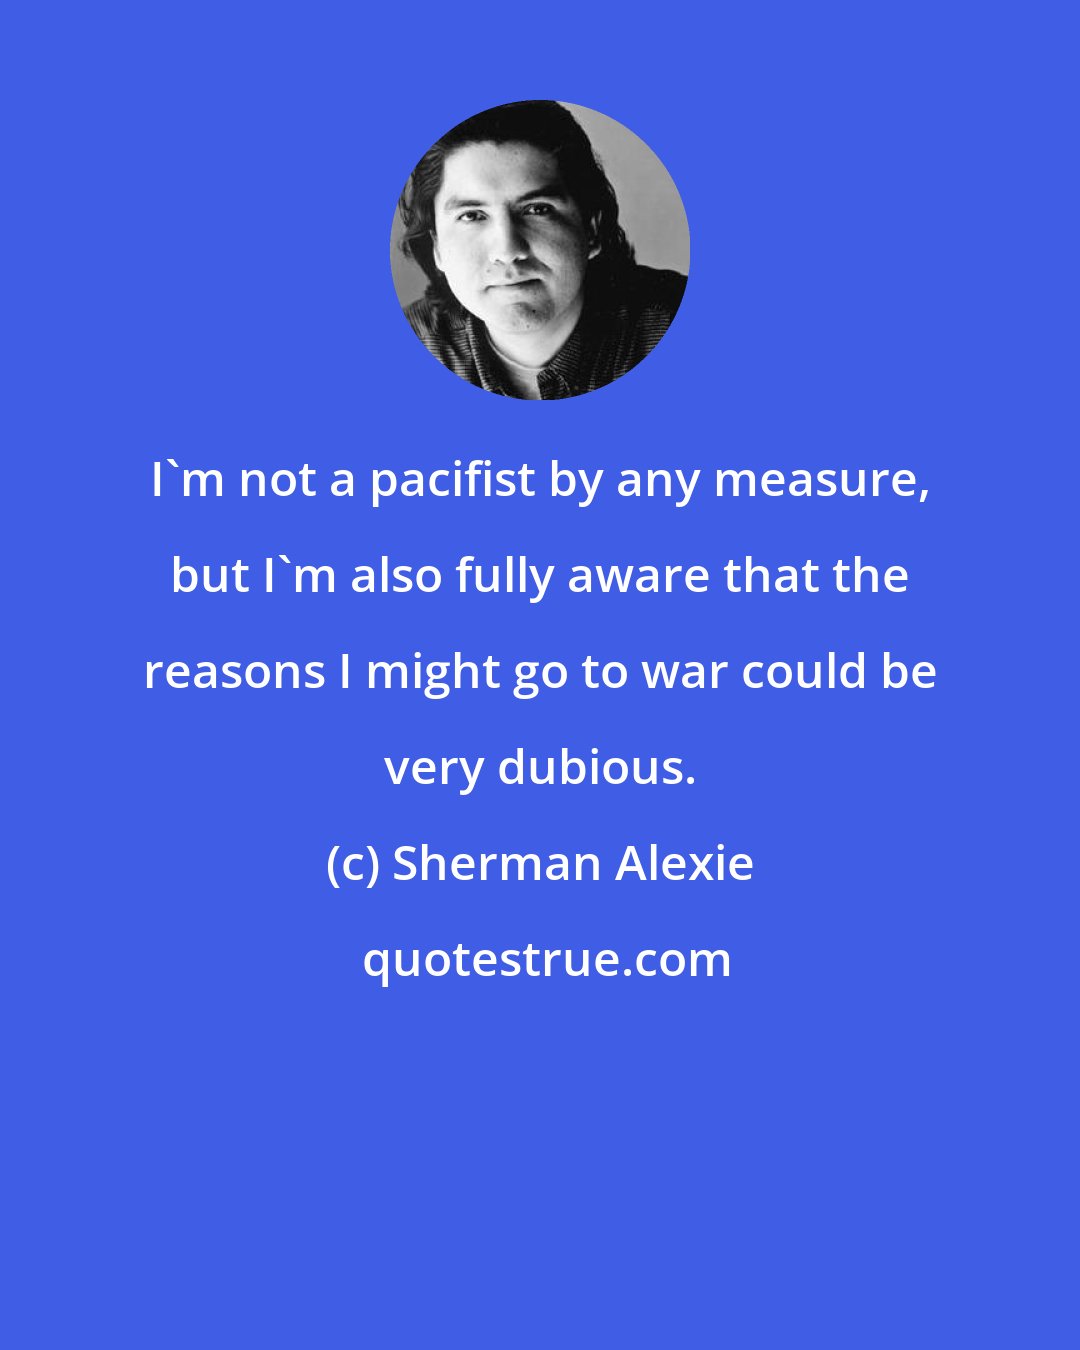 Sherman Alexie: I'm not a pacifist by any measure, but I'm also fully aware that the reasons I might go to war could be very dubious.